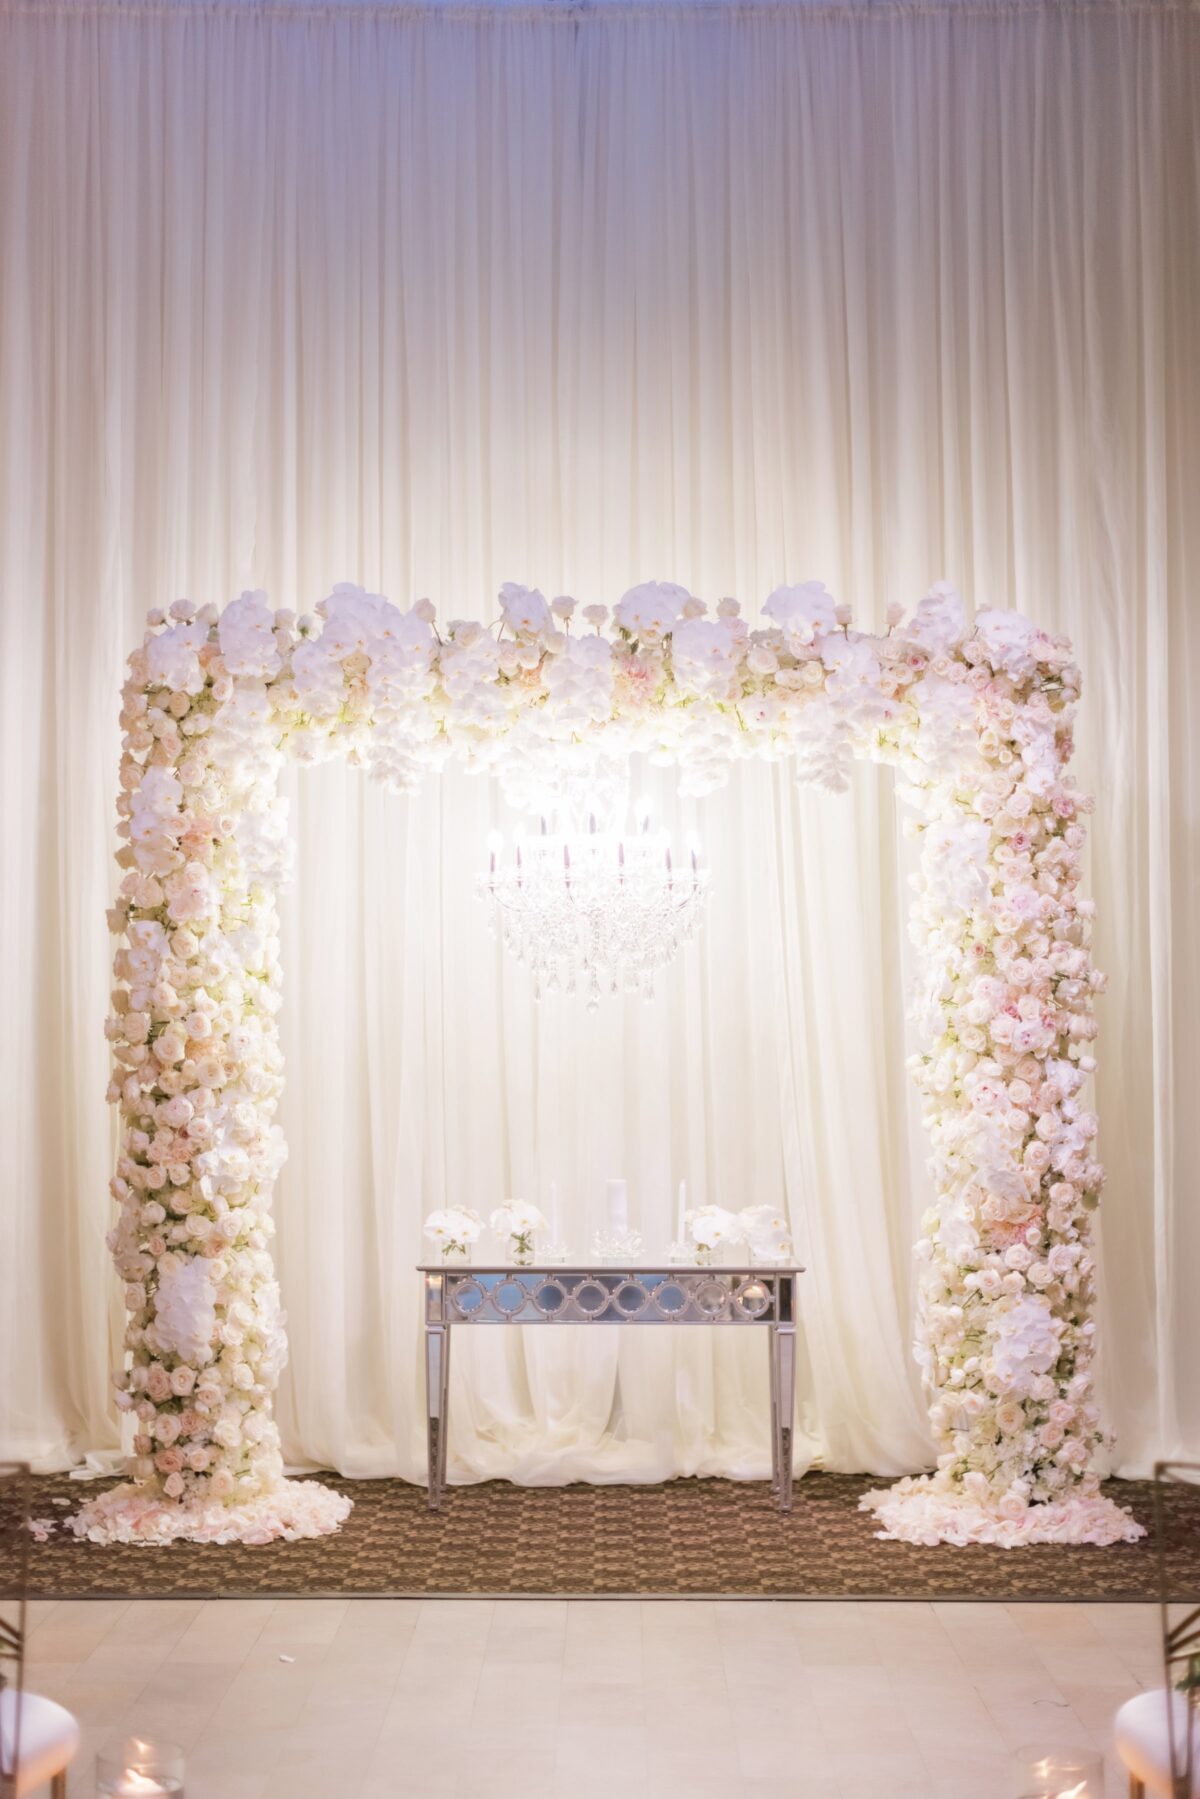 Blush wedding ceremony altar with floral arch - Photography: Brooke Images